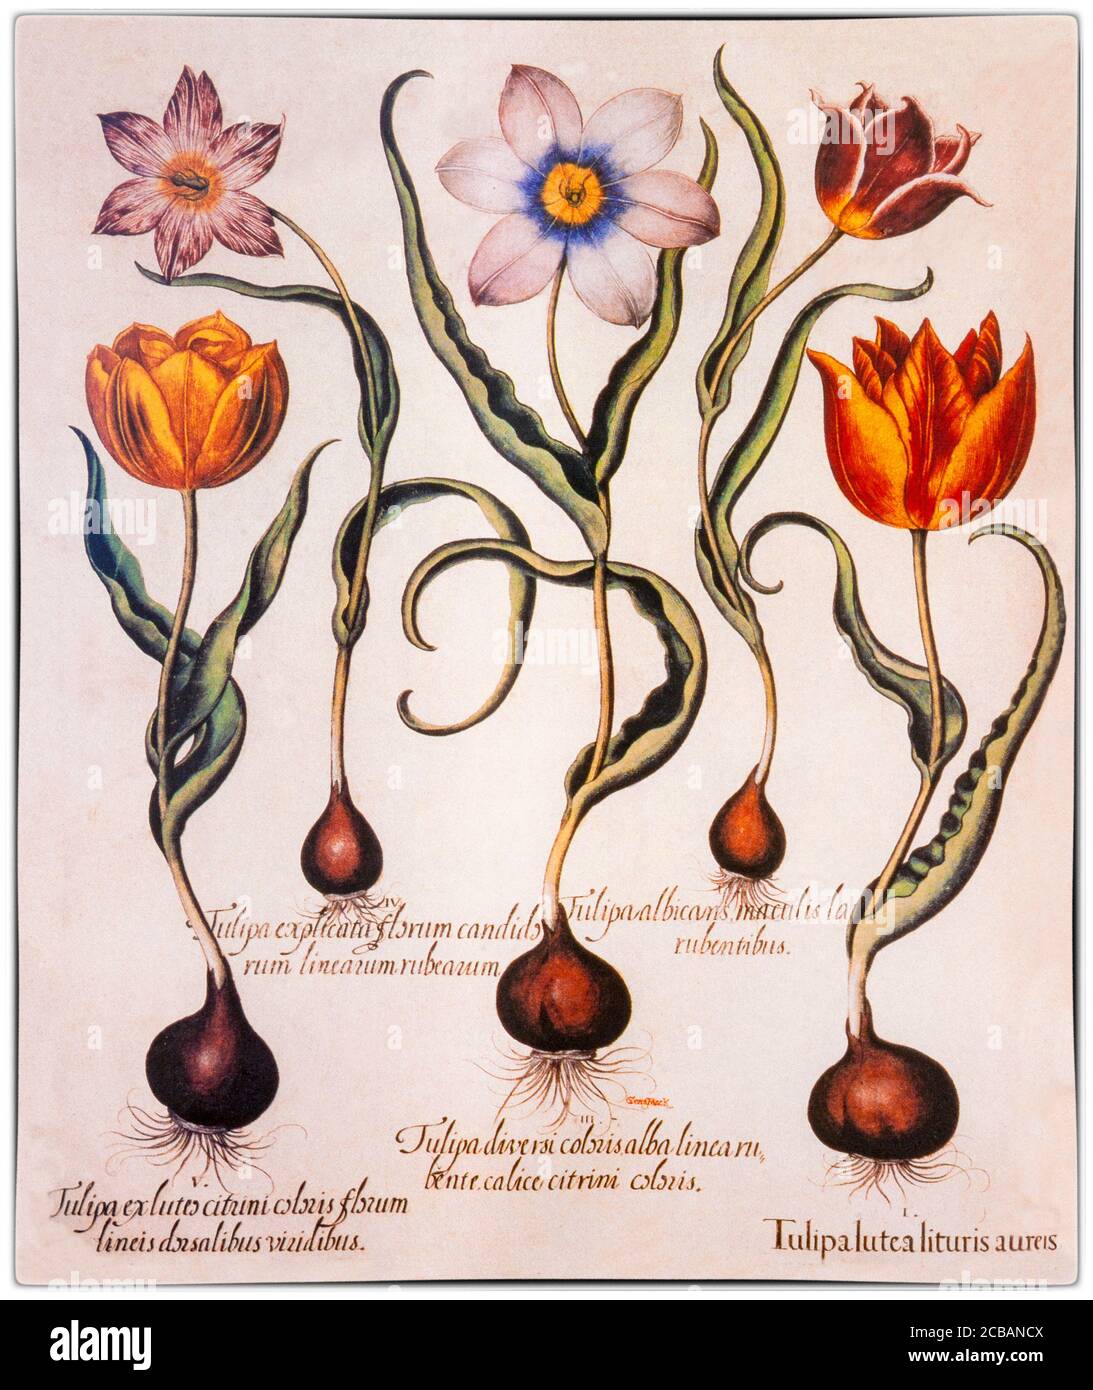 A collection of flowers from the Hortus Eystettensis, a codex produced by Basilius Besler in 1613 of the garden of the bishop of Eichstätt in Bavaria. Besler had the assistance of his brother and a group of skilled German draughtsmen and engravers, including Sebastian Schedel, an accomplished painter, and Wolfgang Kilian, a skilled engraver from Augsburg. After the bishop’s death, the operations moved to Nürnberg and a new team of engravers, among whom were Johannes Leypold, Georg Gärtner, Levin and Friedrich van Hulsen, Peter Isselburg, Heinrich Ulrich, Dominicus Custos and Servatius Raeven. Stock Photo